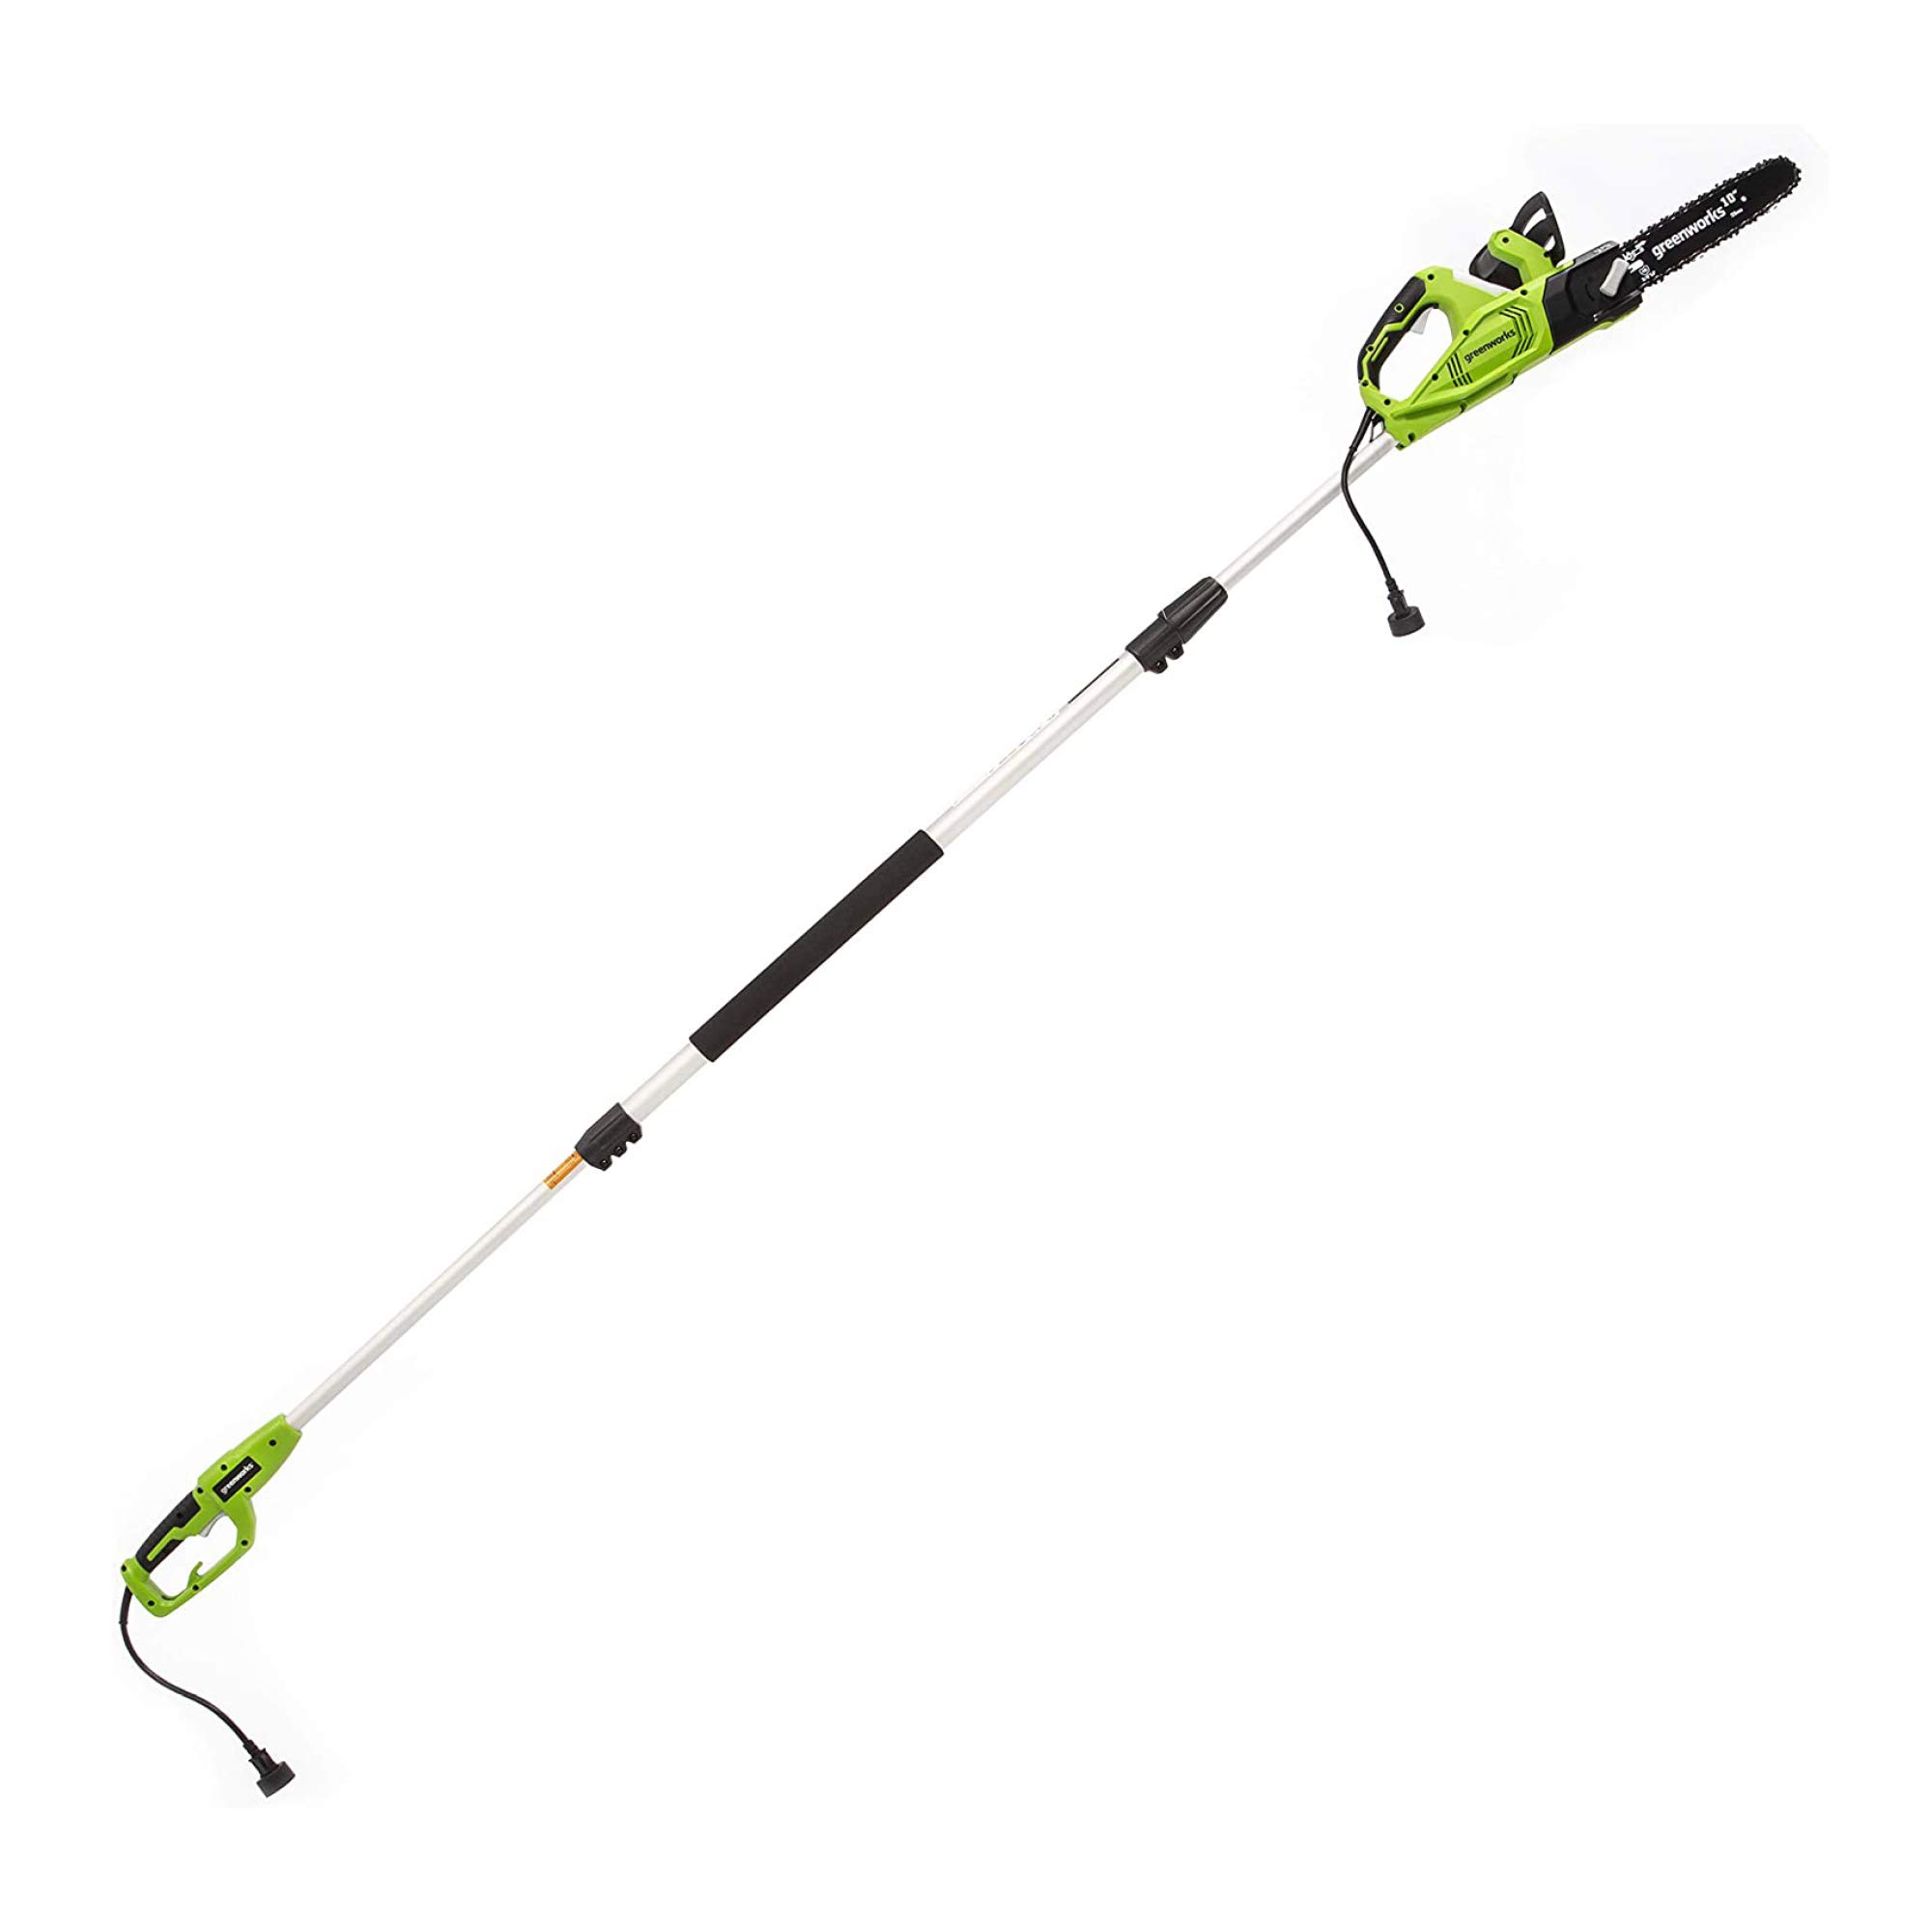 10" 7-Amp Greenworks Corded Electric Pole Saw $70 + Free Shipping